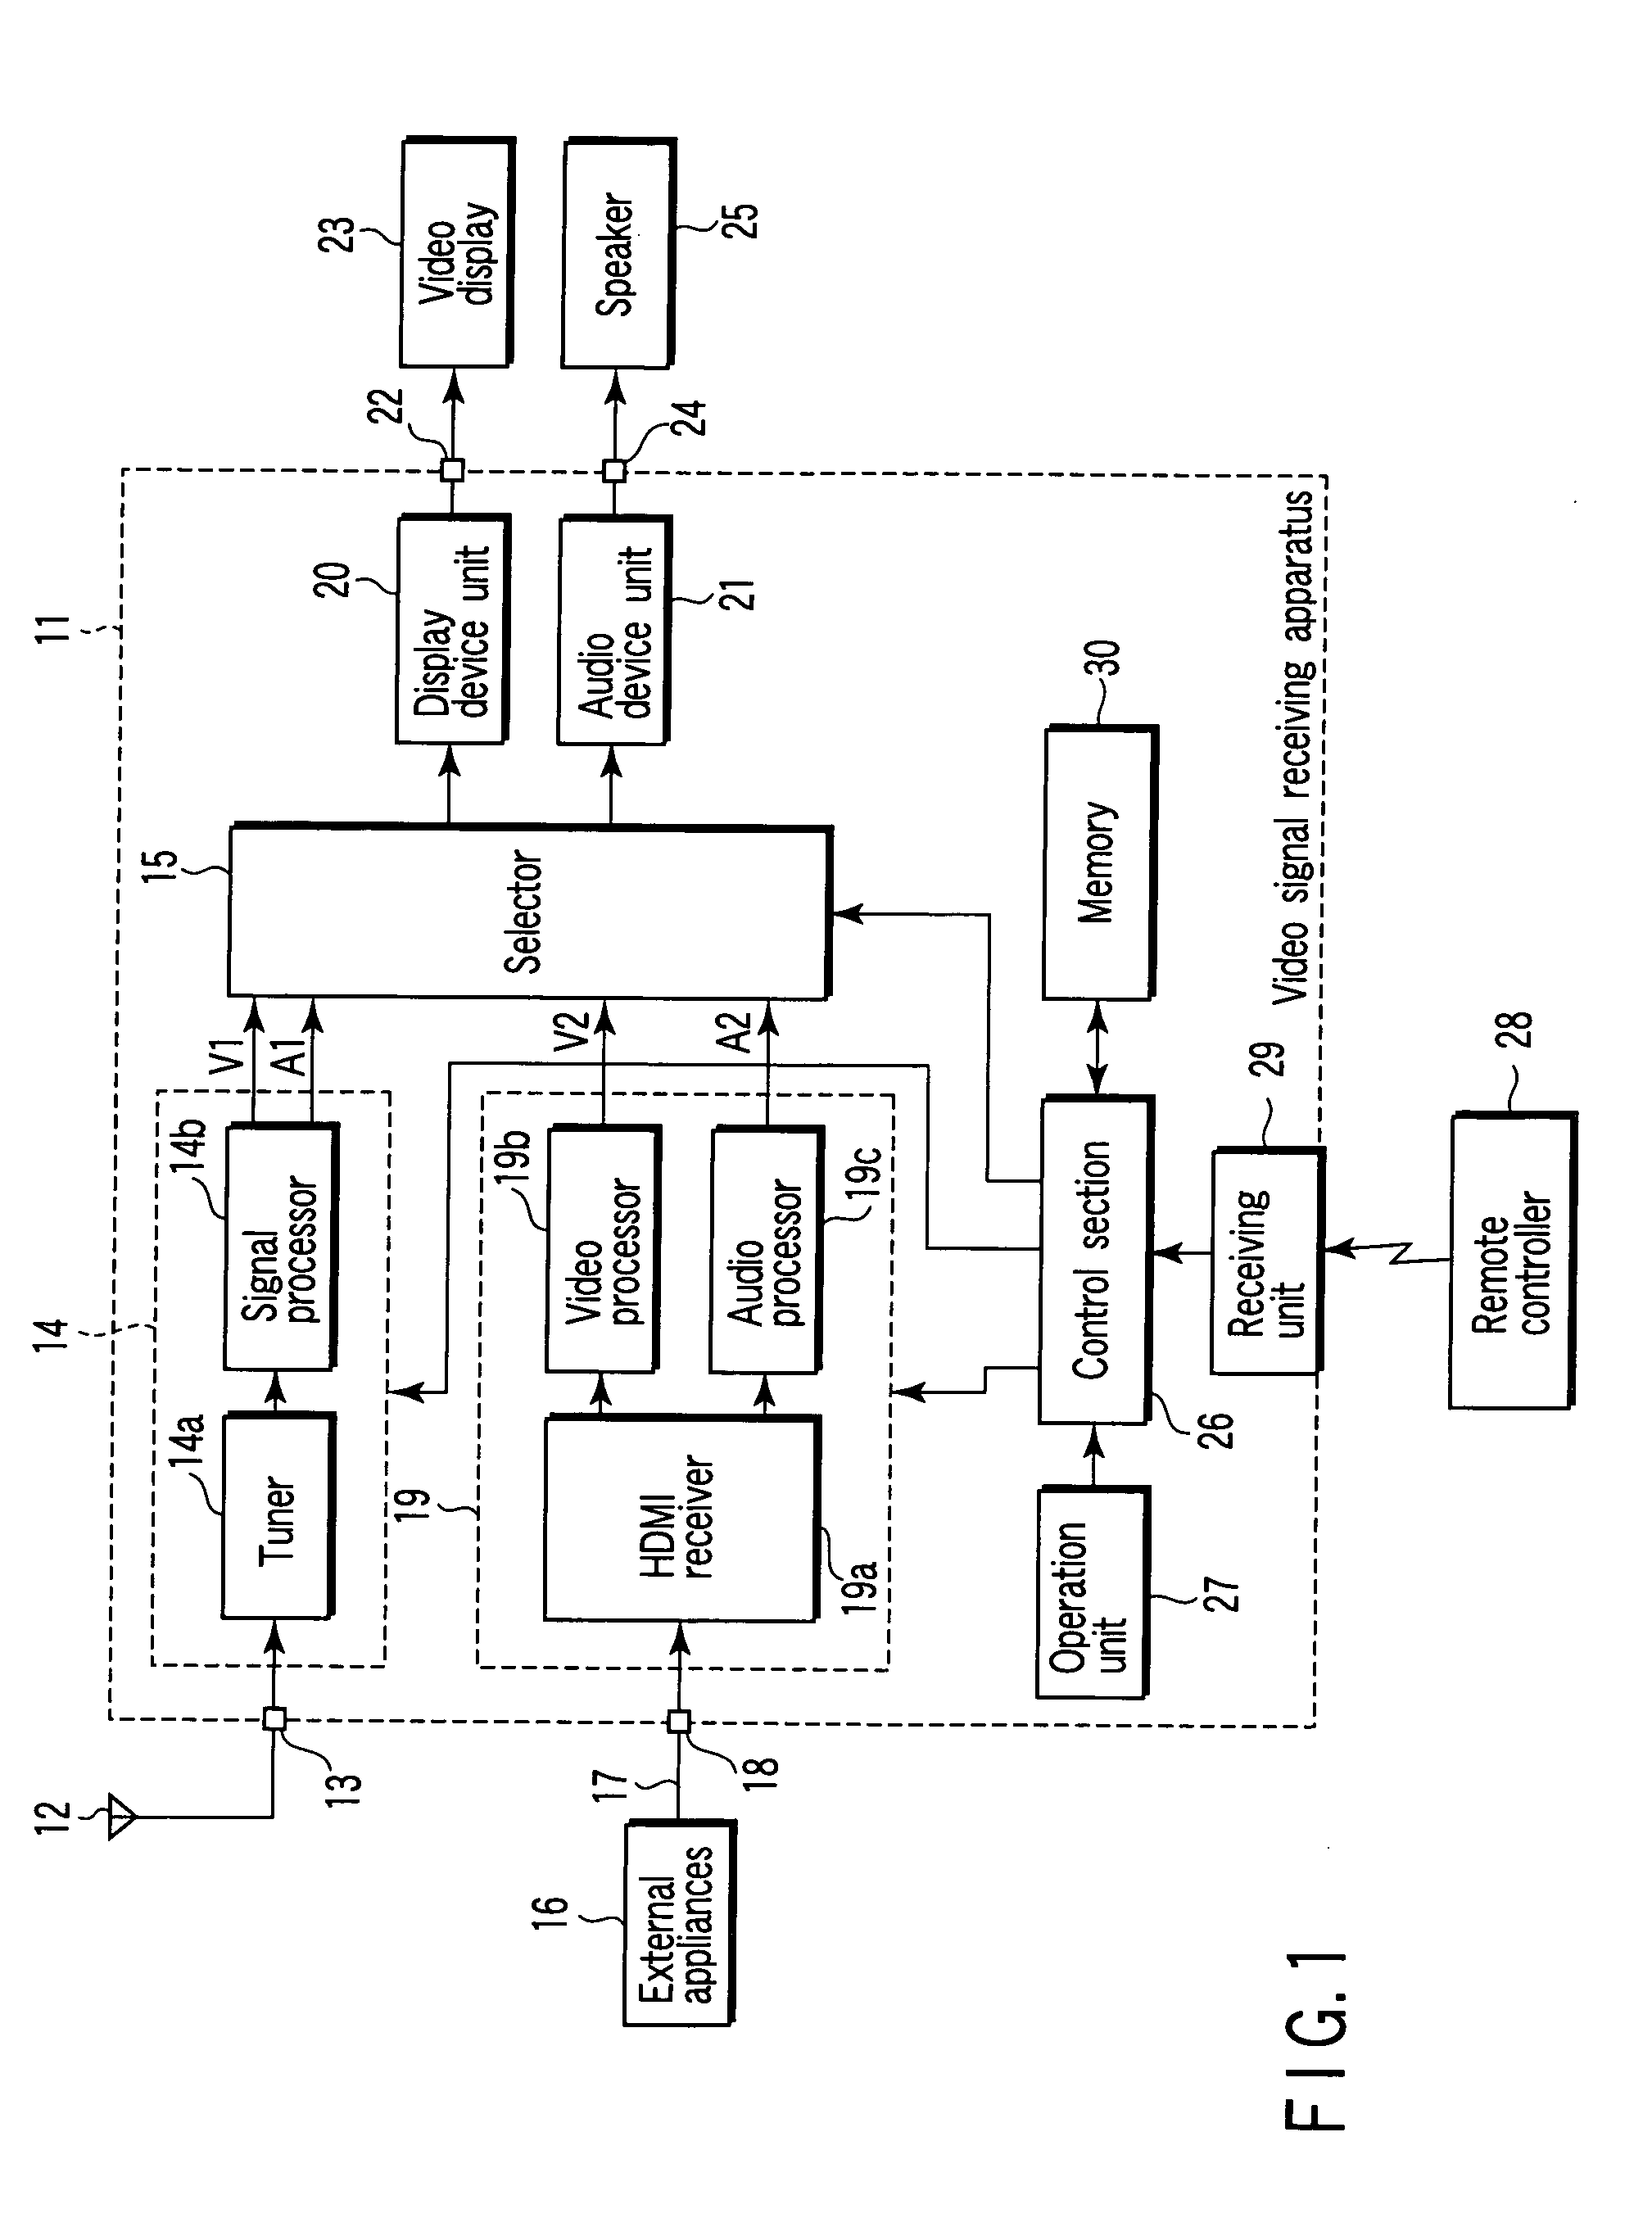 Video signal receiving apparatus and method